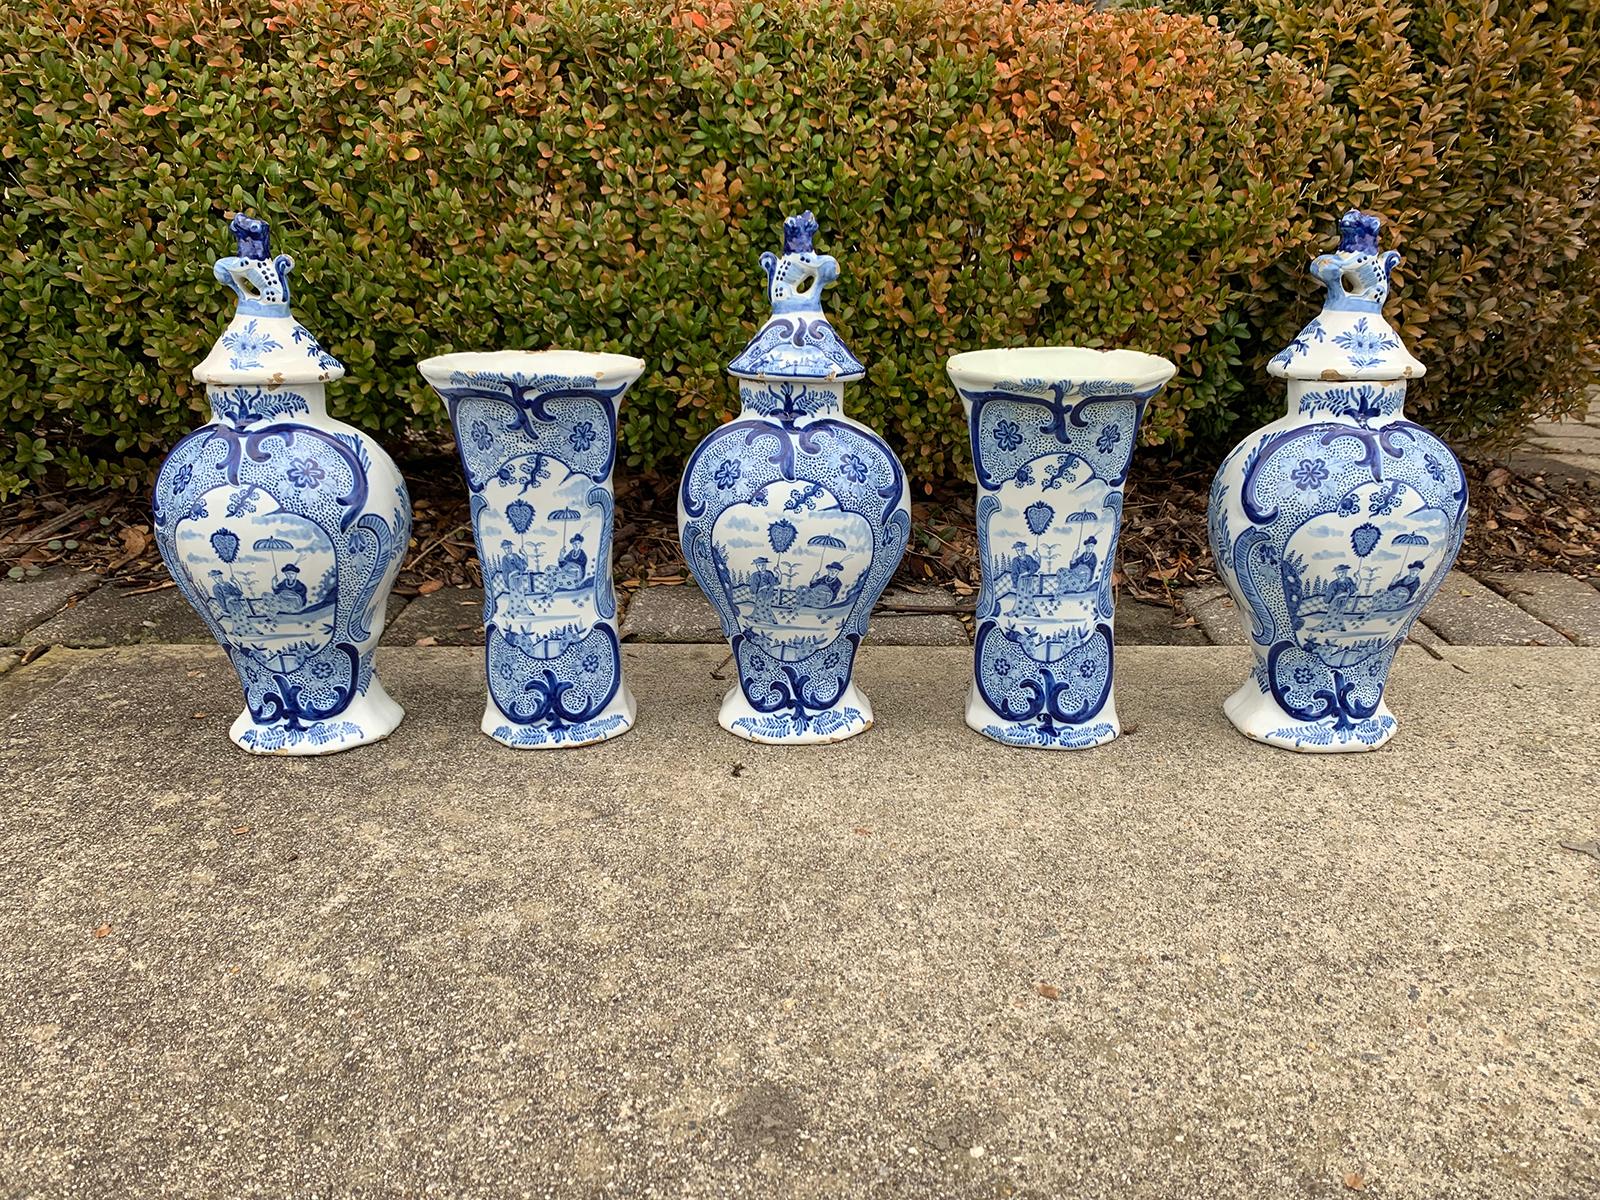 19th century five-piece delft-style blue and white porcelain garniture, all marked
Measures: Lidded jars: 6